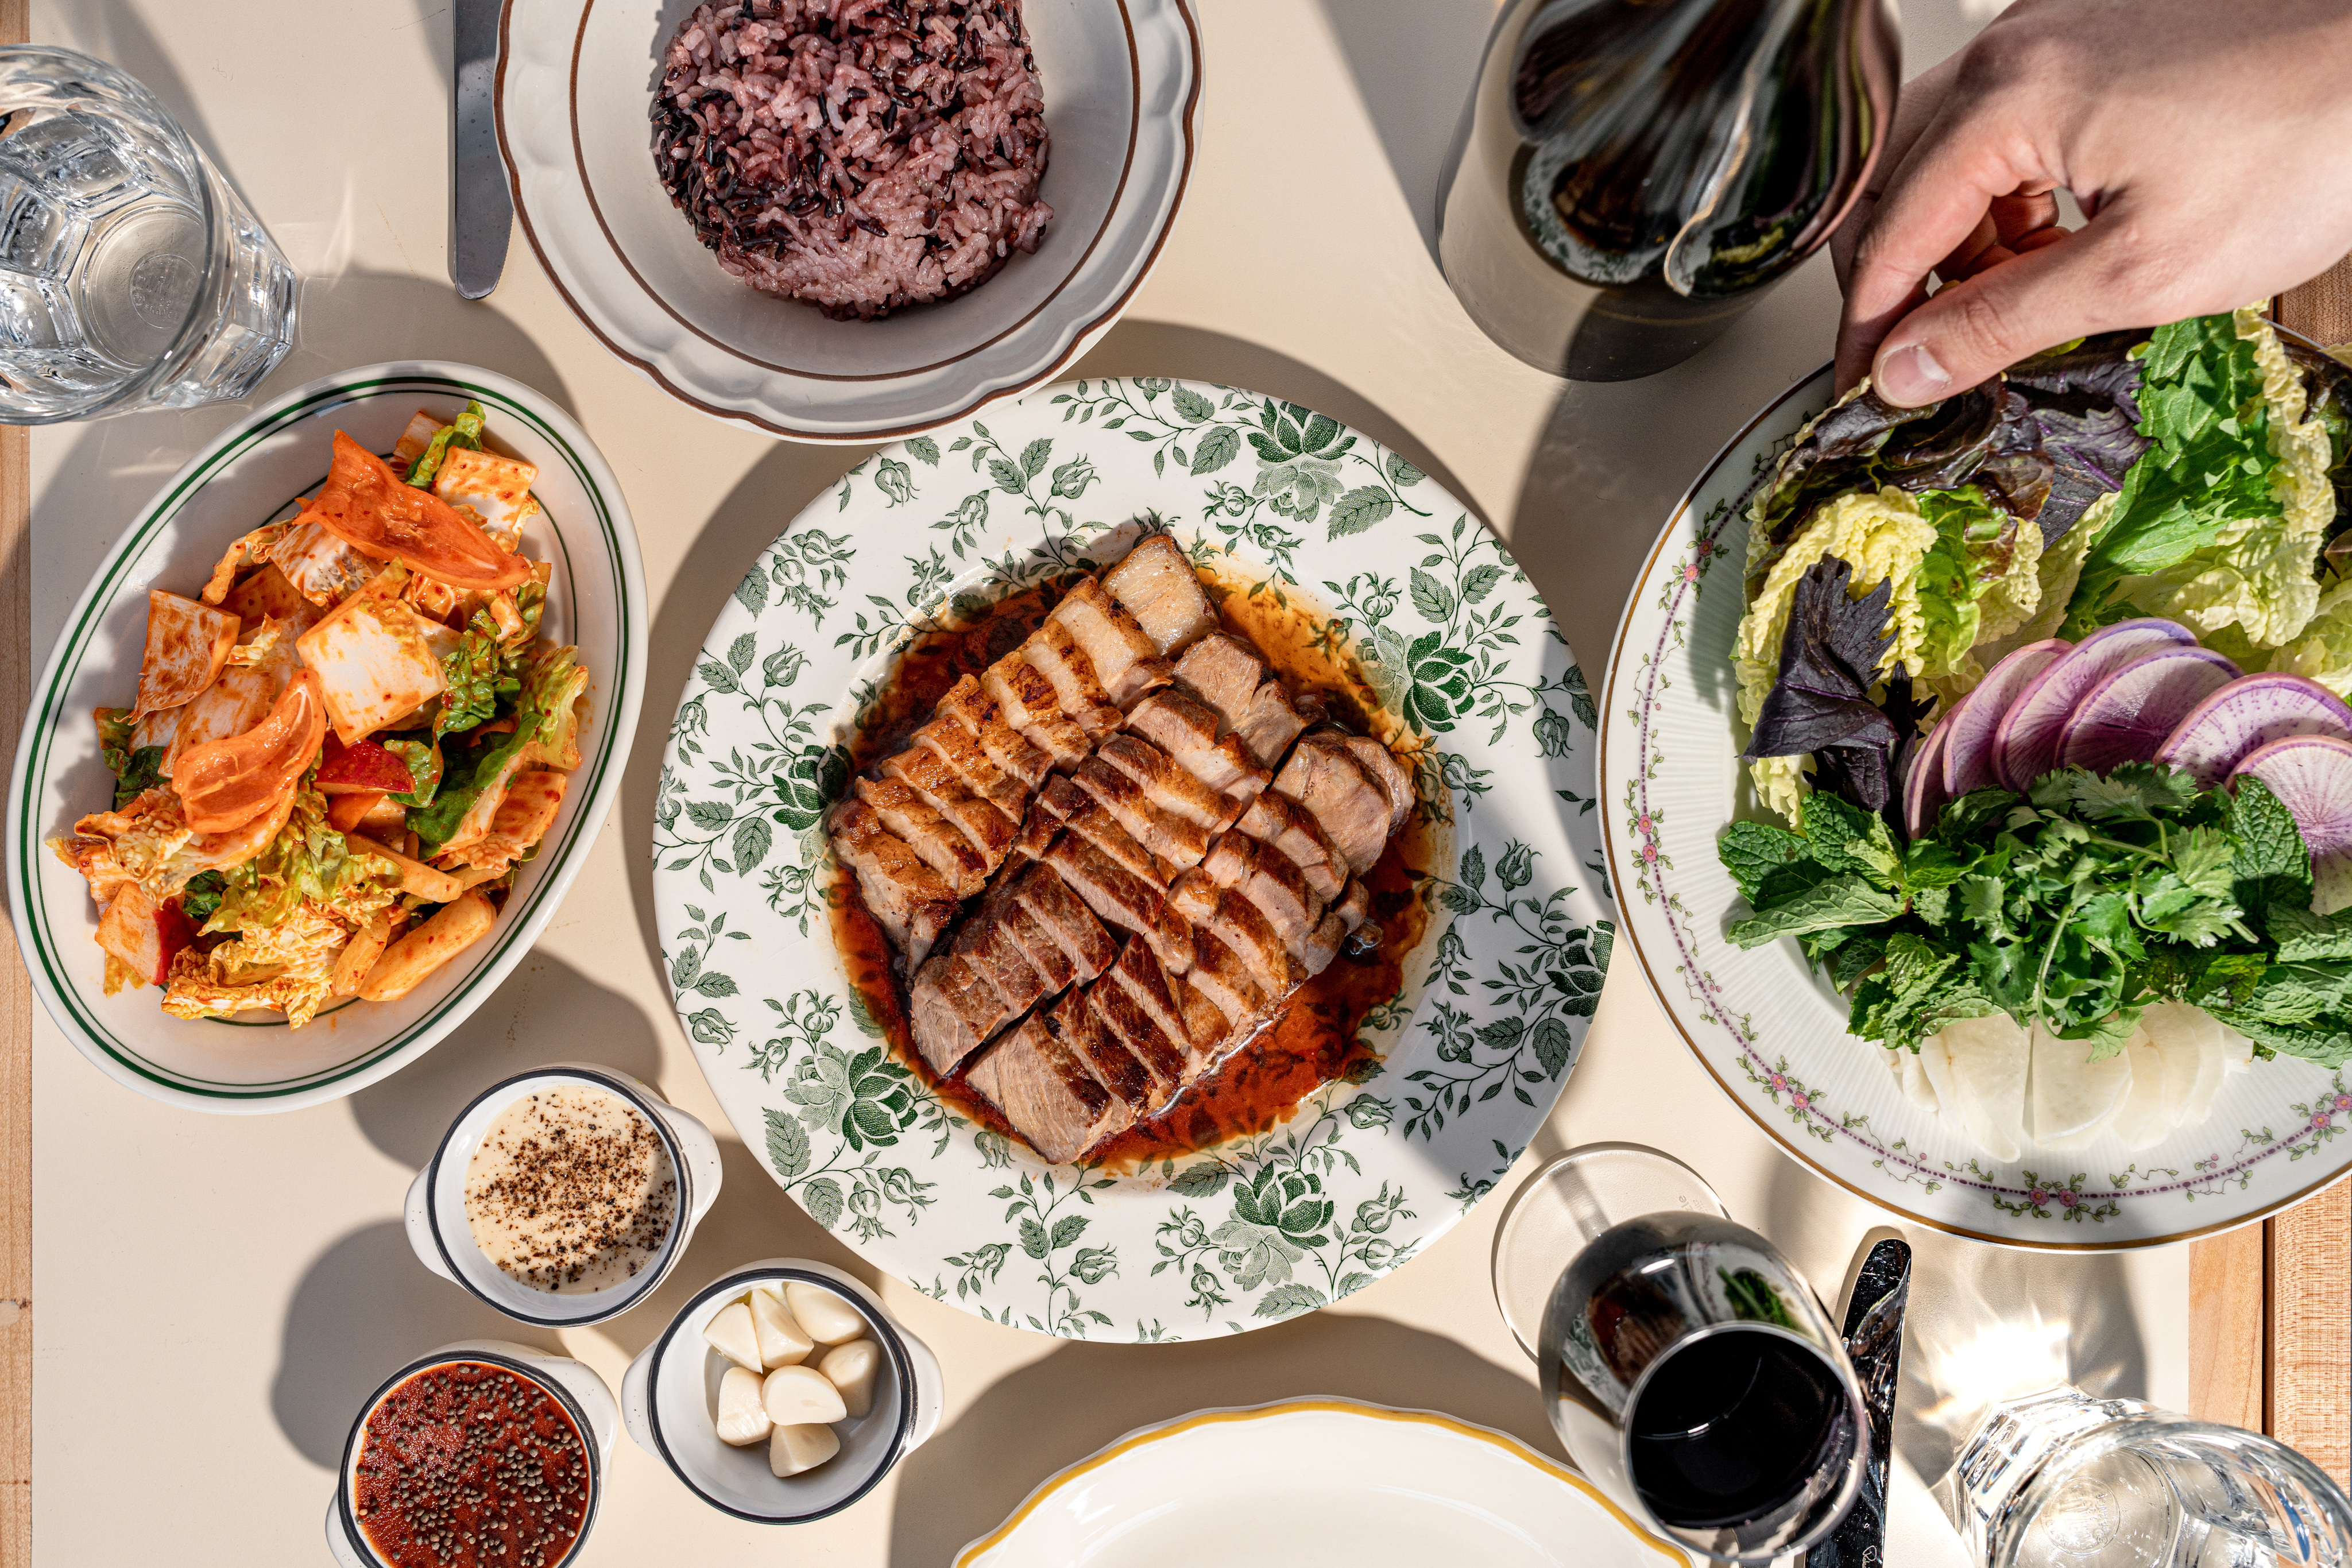 A hand places ssam lettuces at a table with pork coppa, banchan, kimchi, and more.